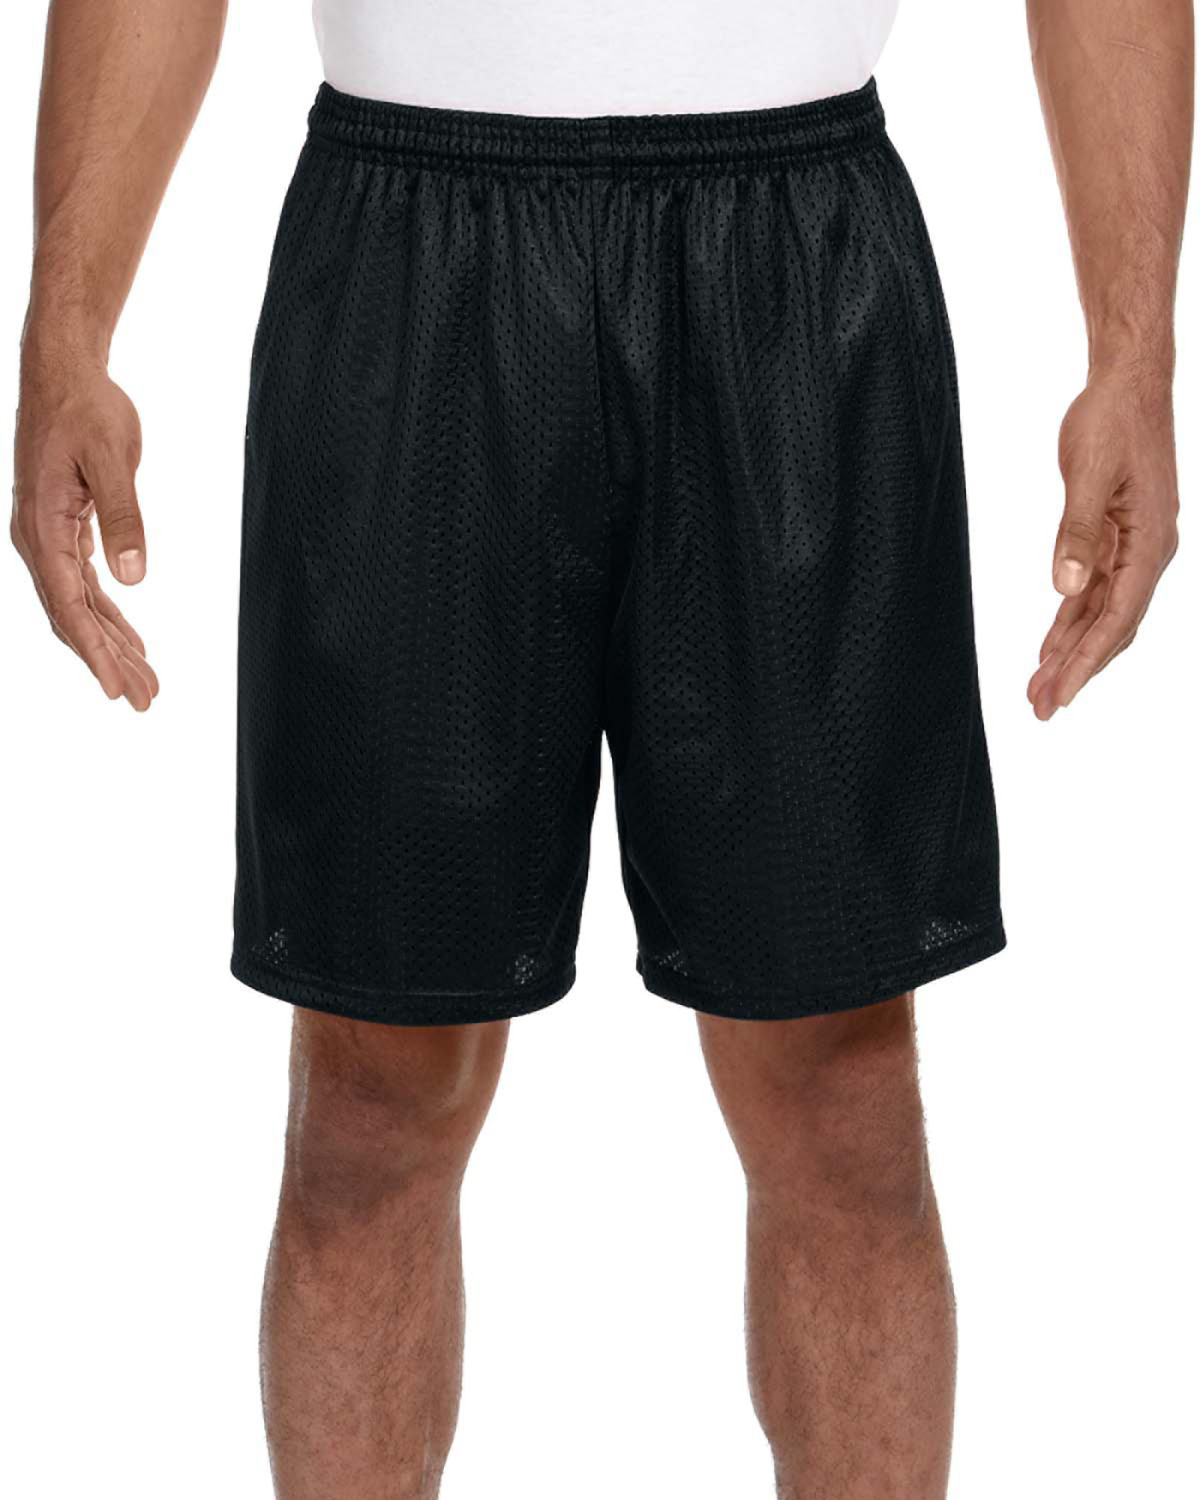 A4 N5293 - Adult Tricot Lined 7" Mesh Shorts